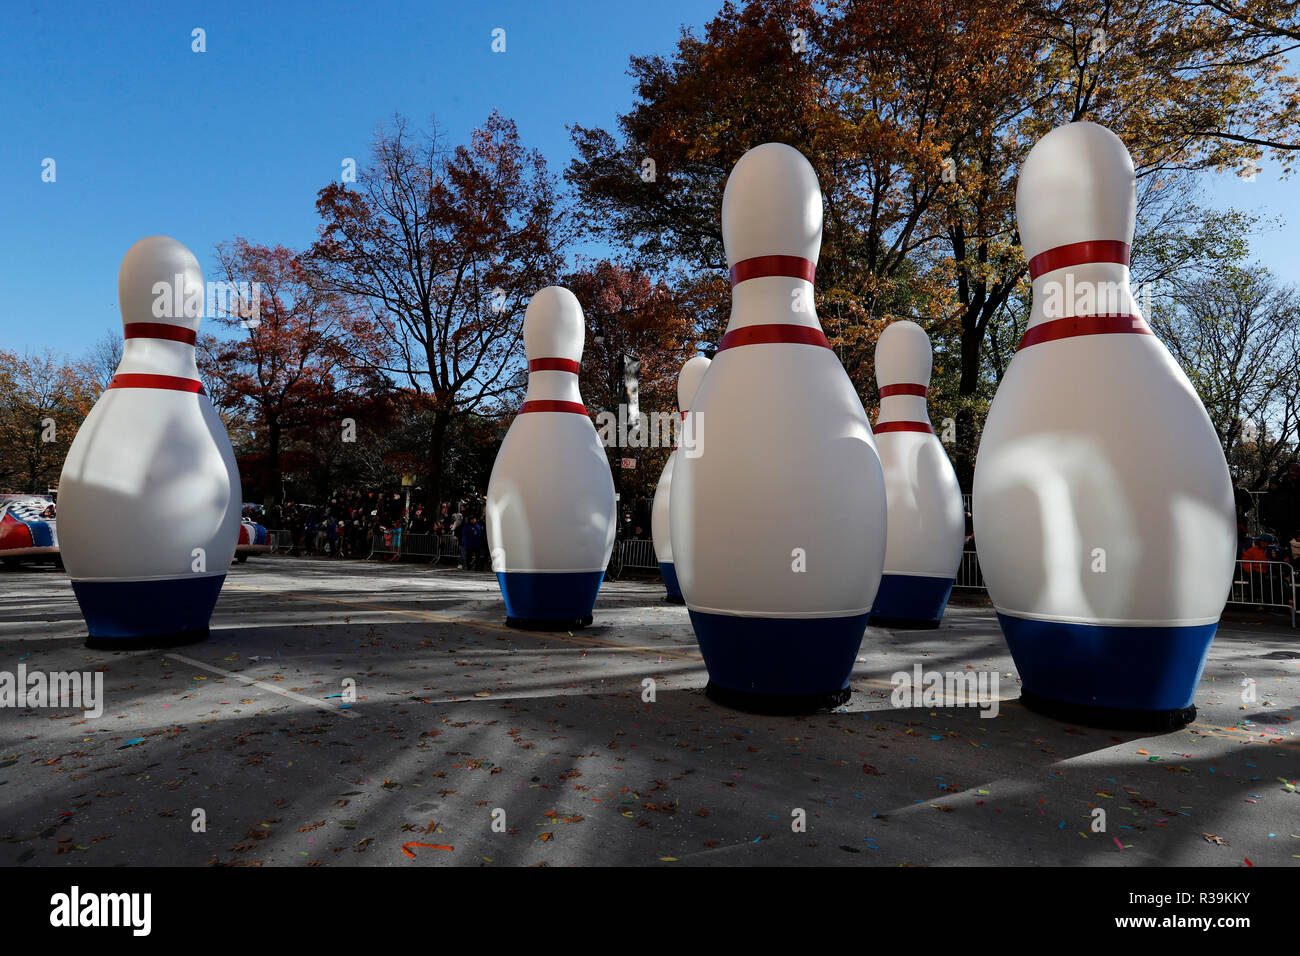 New York, USA. 22nd Nov, 2018. The Go Bowling balloonicles are seen during the 2018 Macys Thanksgiving Day Parade in New York, the United States, on Nov